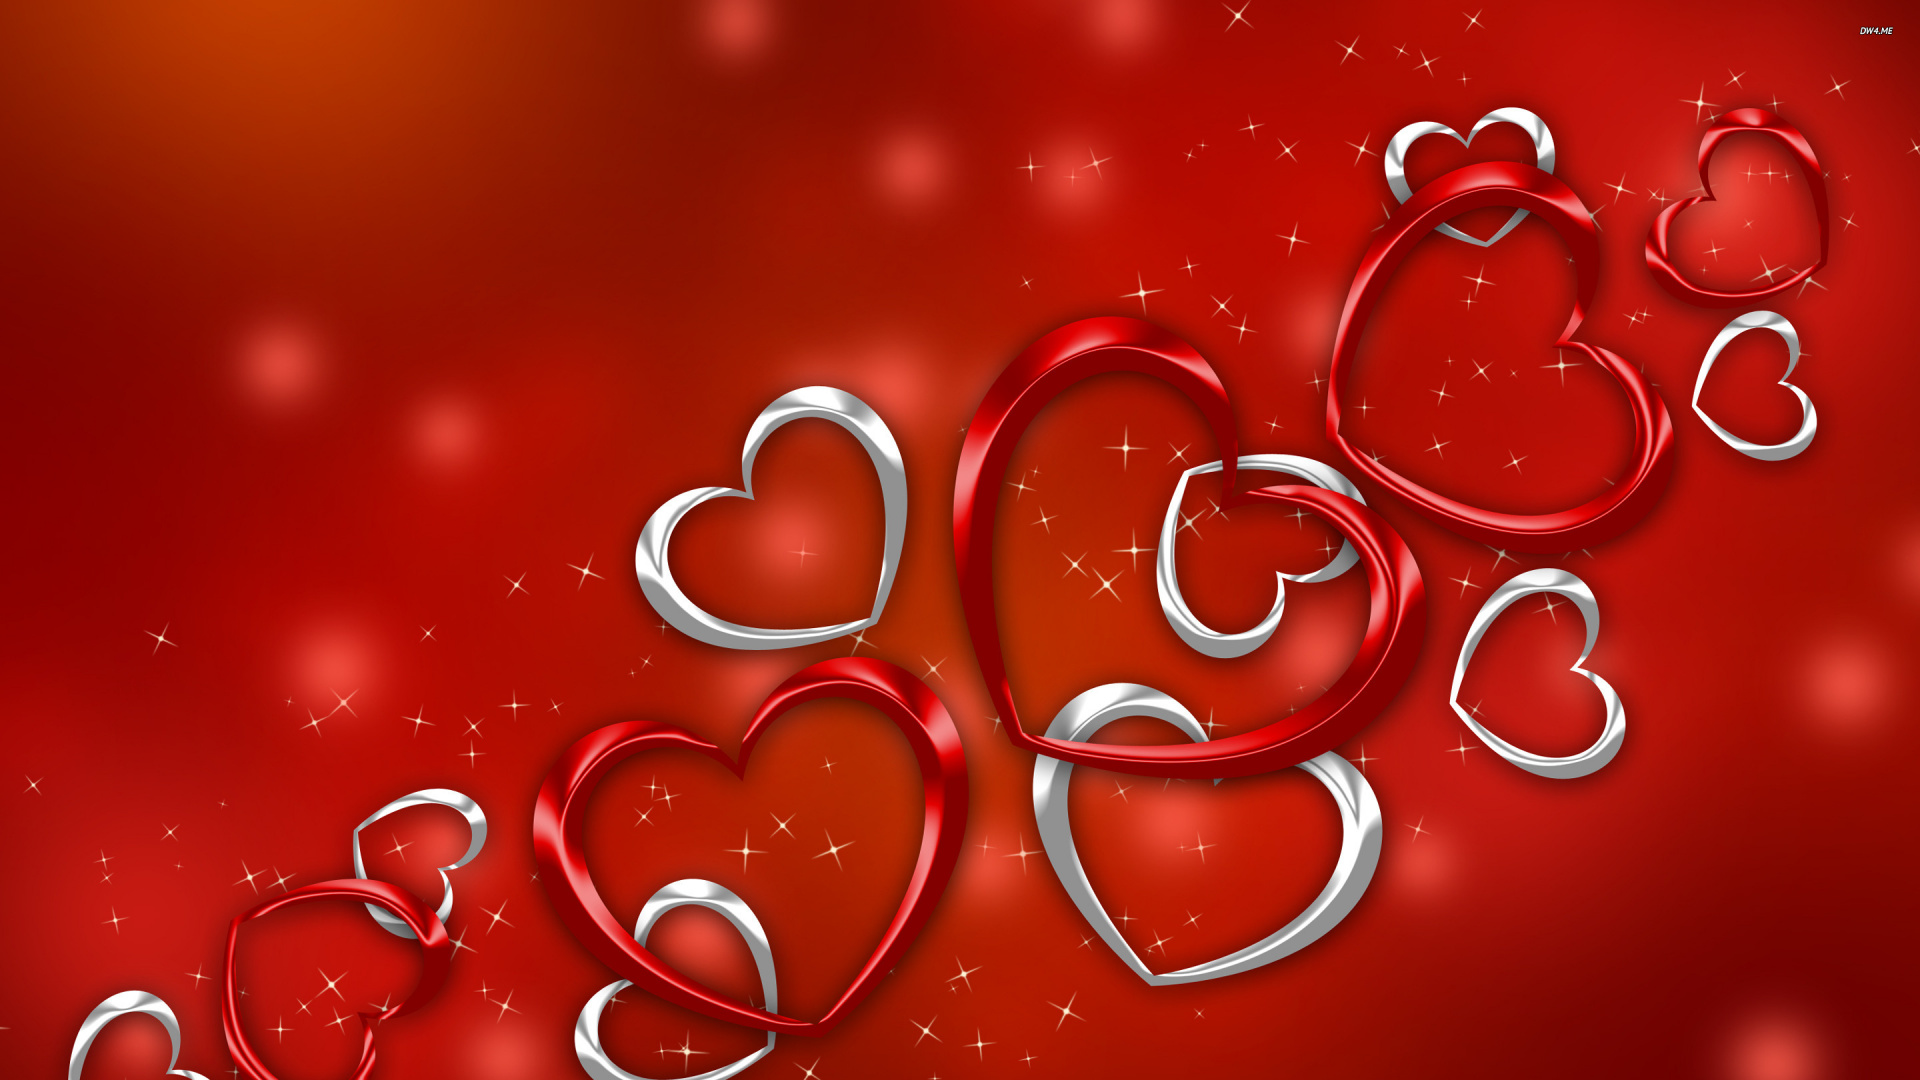 Heart, Valentines Day, Red, Love, Text. Wallpaper in 1920x1080 Resolution